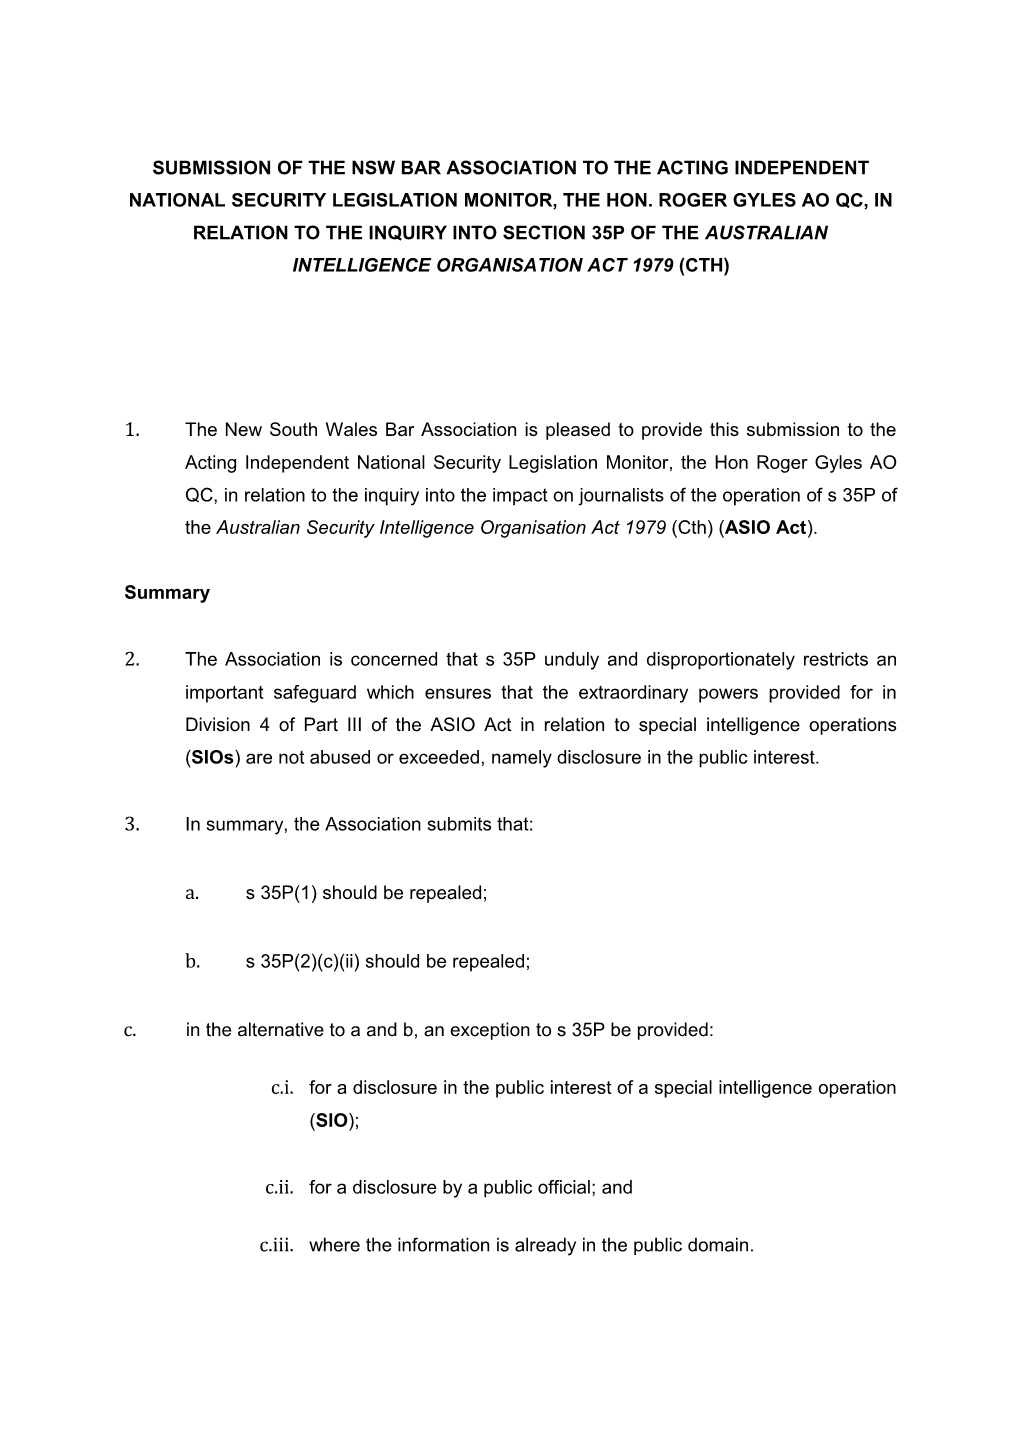 Submission of the Nsw Bar Association to the Attorney-General S Department